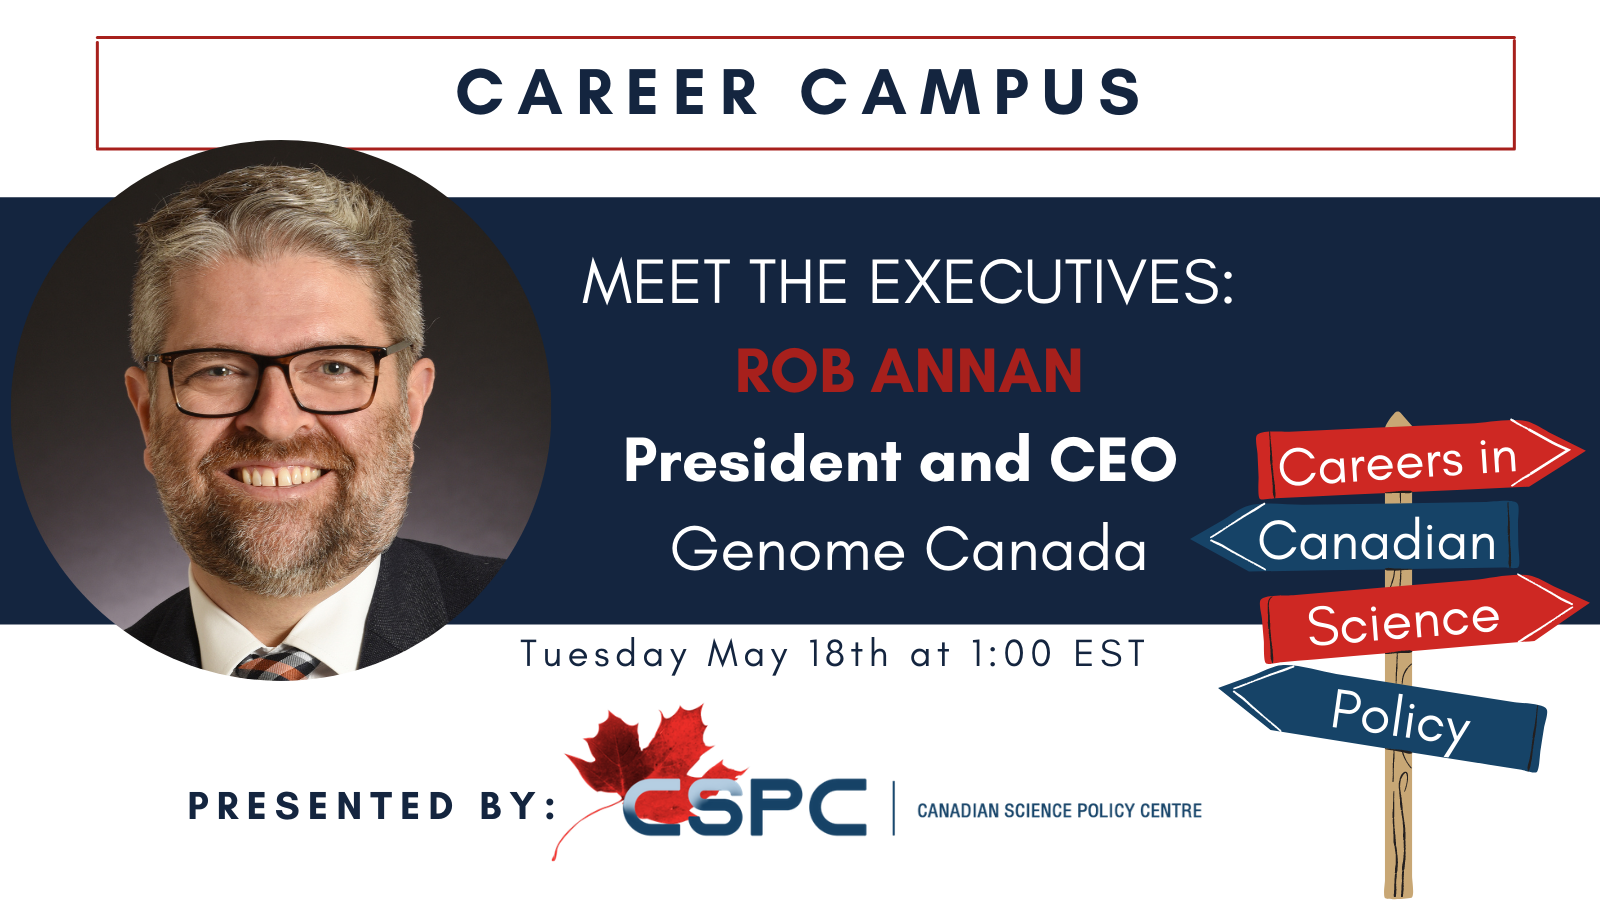 A banner with a headshot of a white man wearing glasses, with the text: career campus, meet the executives: ROb Annan president and CEO of Genome Canada, presented by CSPC